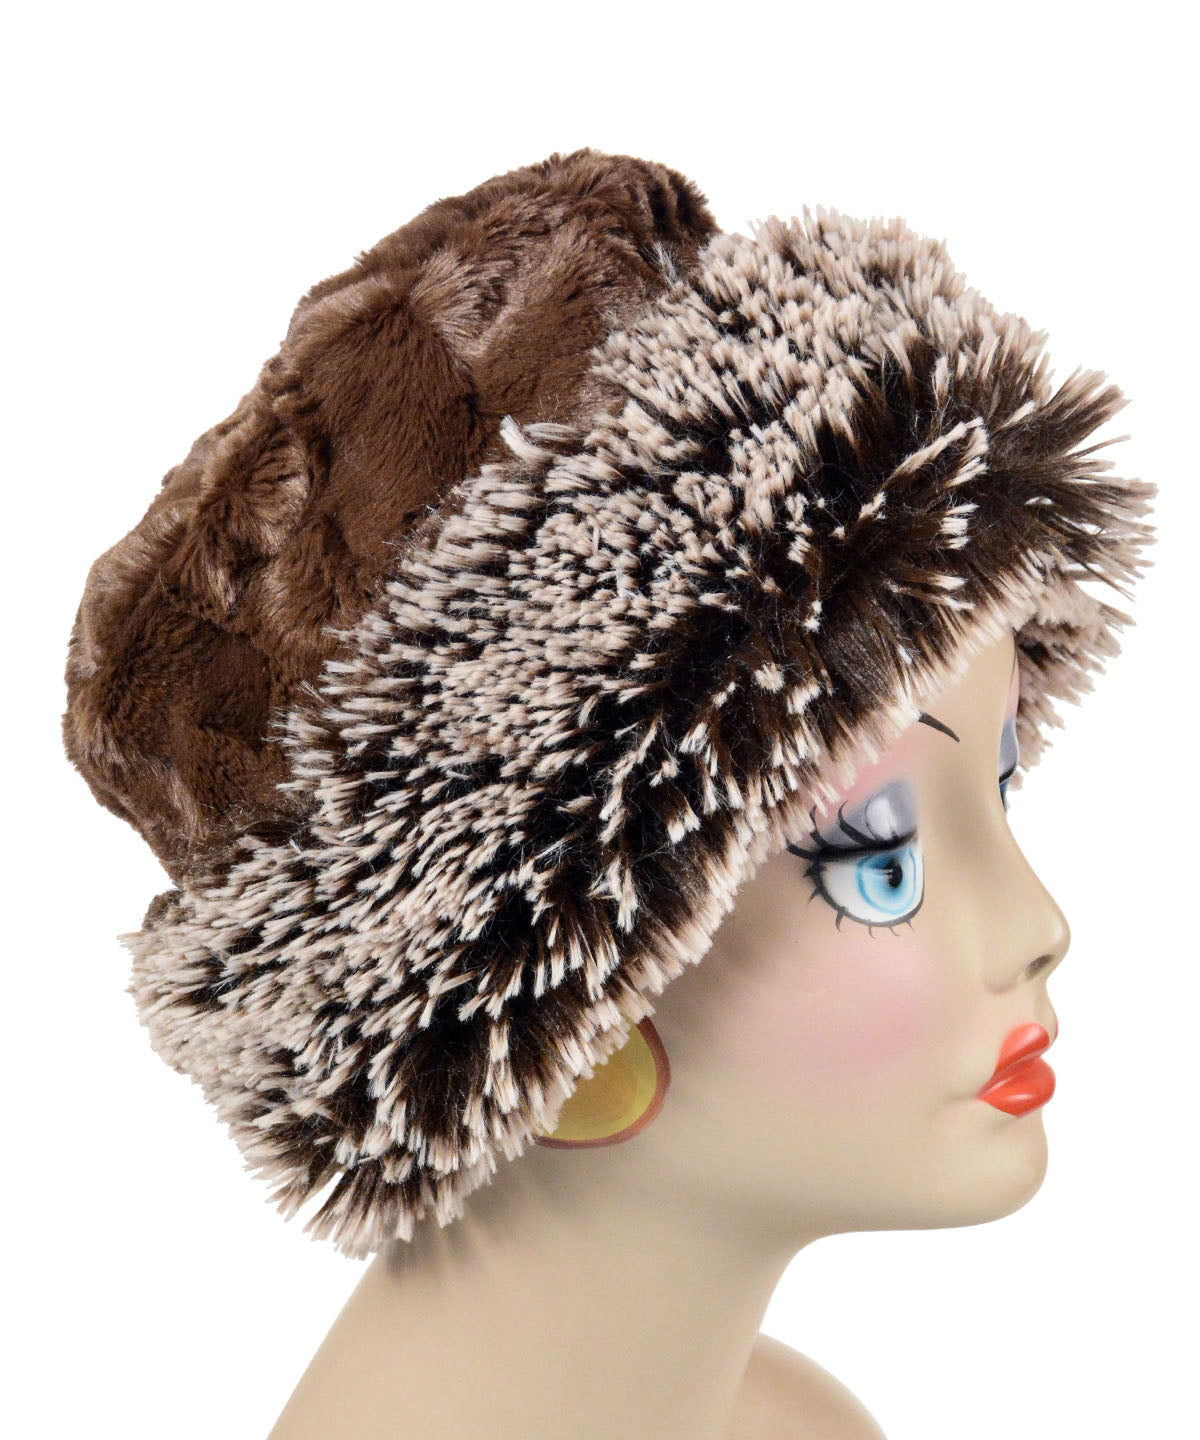  Side View of  the Cuffed Pillbox in Silver Tip Fox in Brown with Cuddly Faux Fur in Chocolate by Pandemonium Millinery. Handmade in Seattle, WA USA.